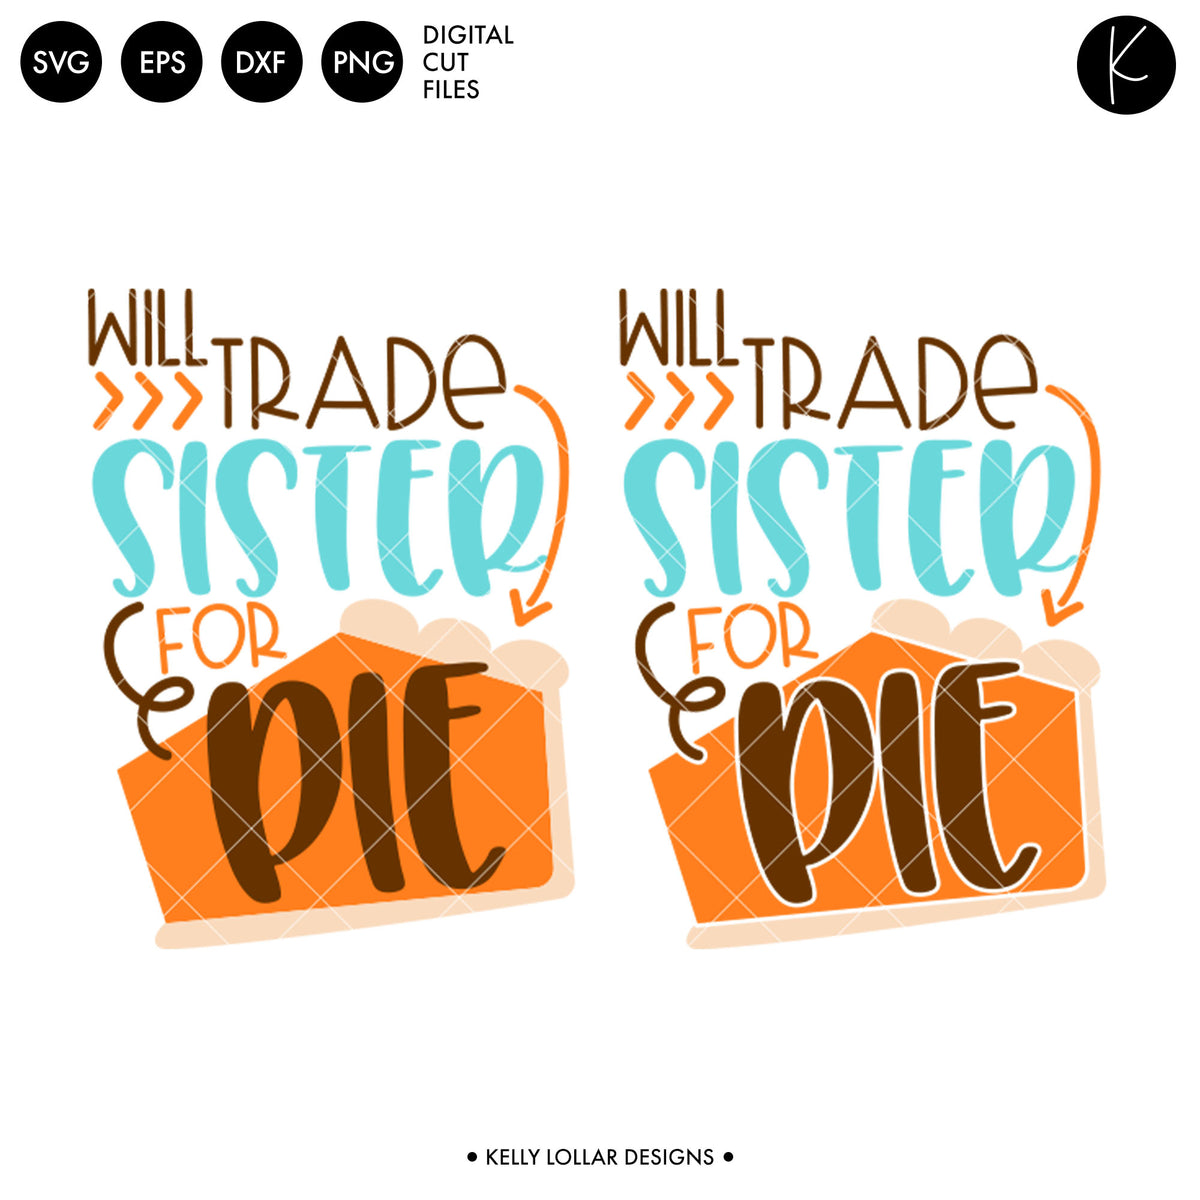 Will Trade Brother or Sister for Pie | SVG DXF EPS PNG Cut Files